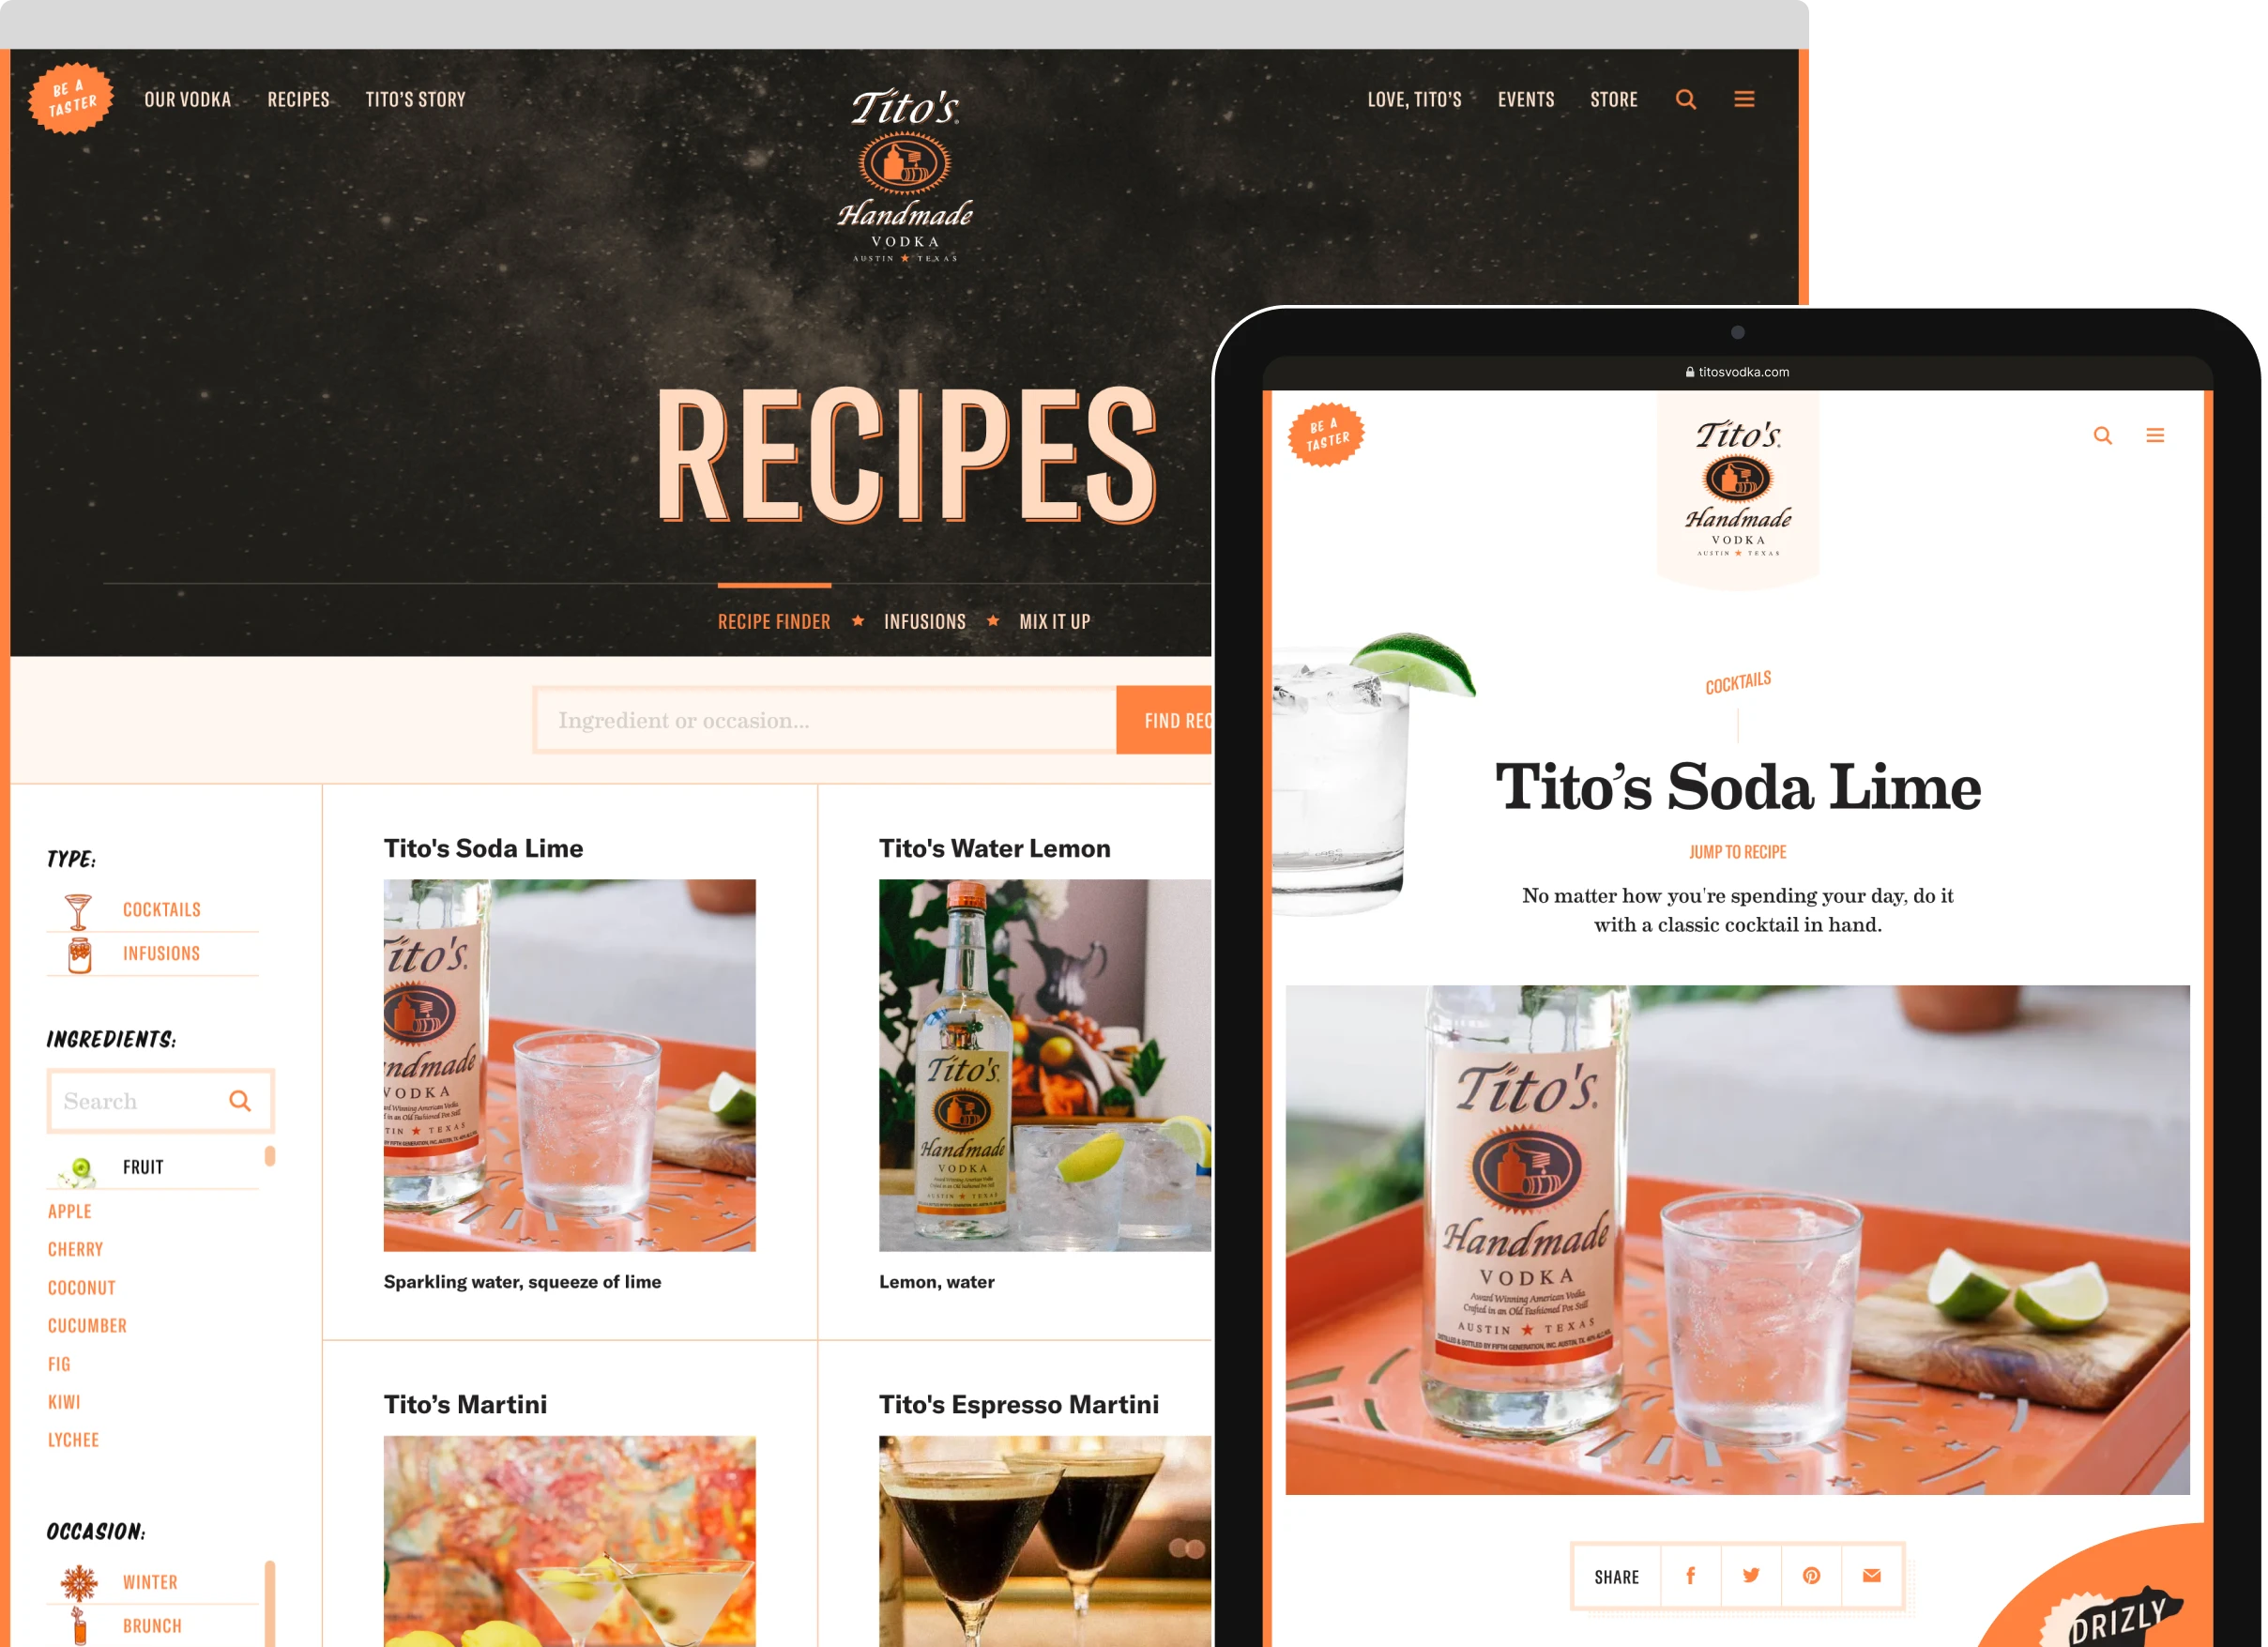 A desktop browser and tablet displaying the Tito’s Handmade Vodka recipe finder website